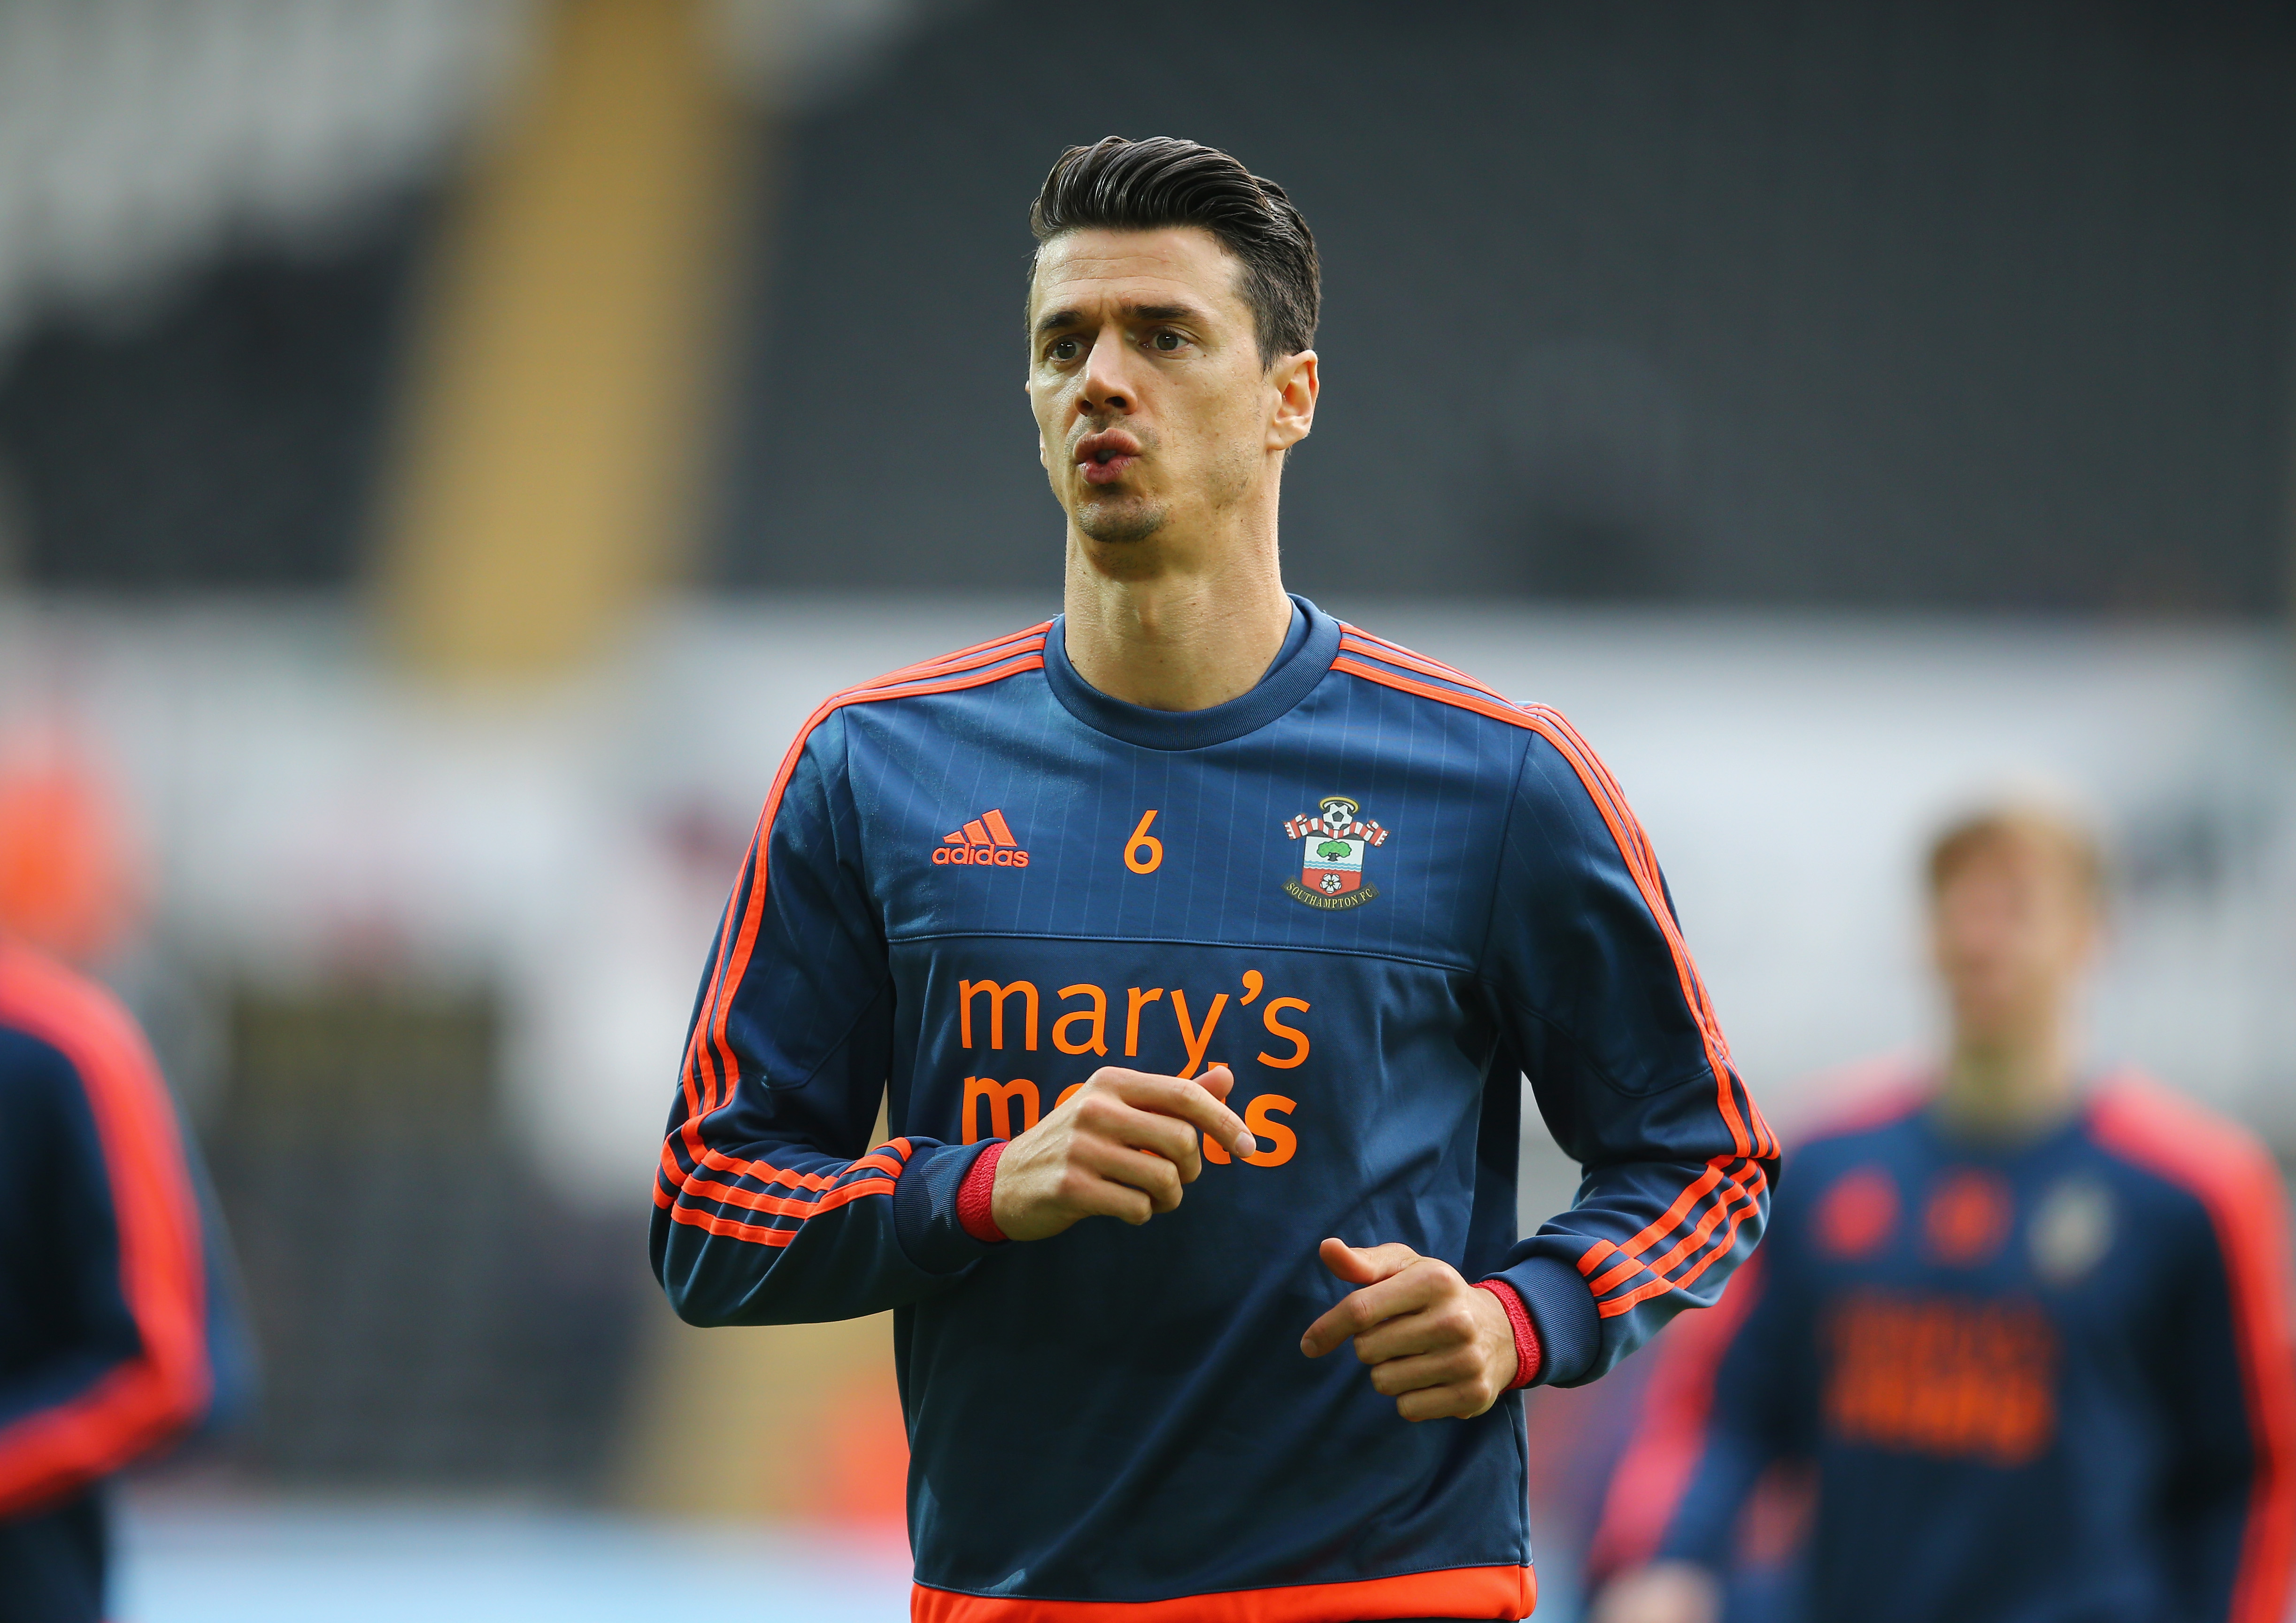 SWANSEA, WALES - FEBRUARY 13: Jose Fonte of Southampton warms up prior to the Barclays Premier League match between Swansea City and Southampton at Liberty Stadium on February 13, 2016 in Swansea, Wales.  (Photo by Richard Heathcote/Getty Images)